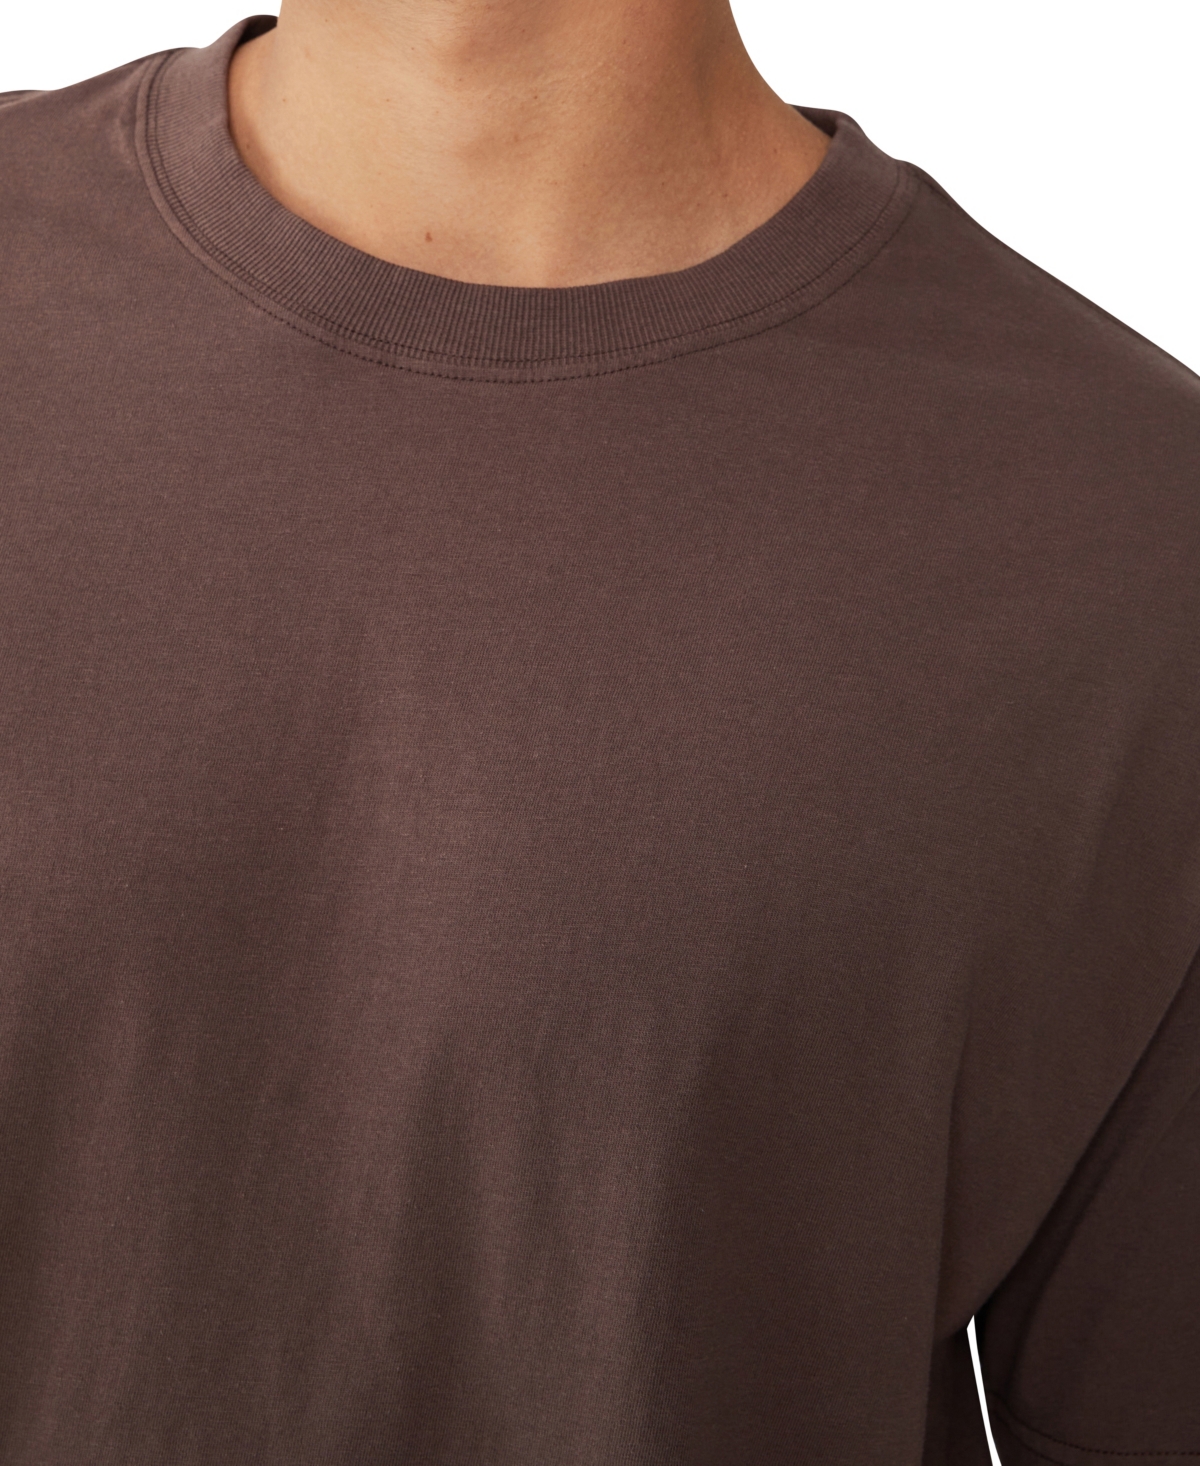 Shop Cotton On Men's Loose Fit T-shirt In Brown